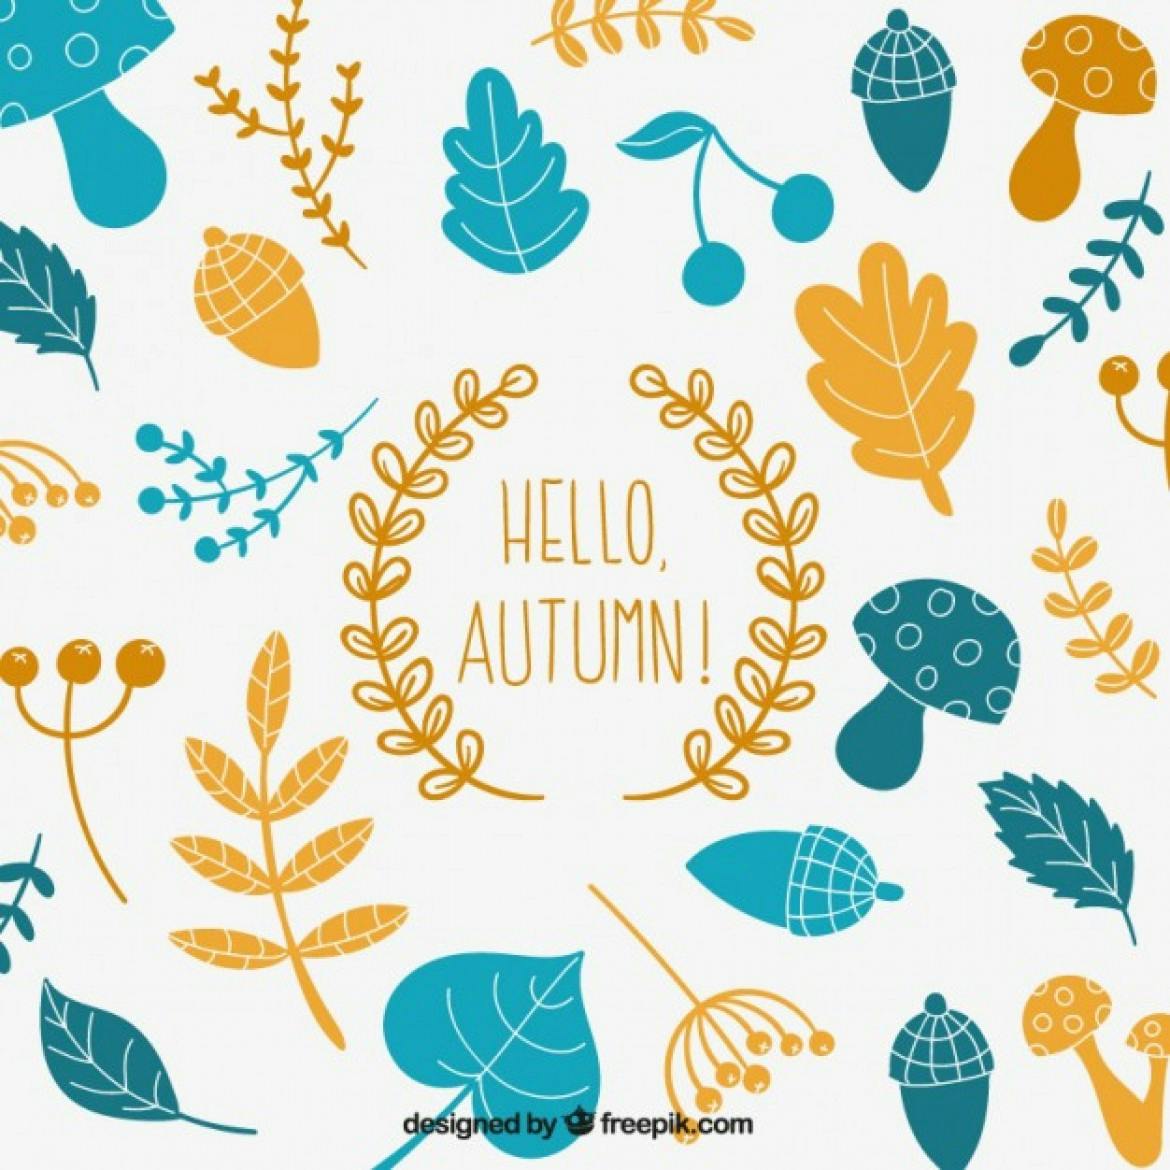 wpid-hello-autumn-background-with-natural-elements_23-2147520958-1170x1170